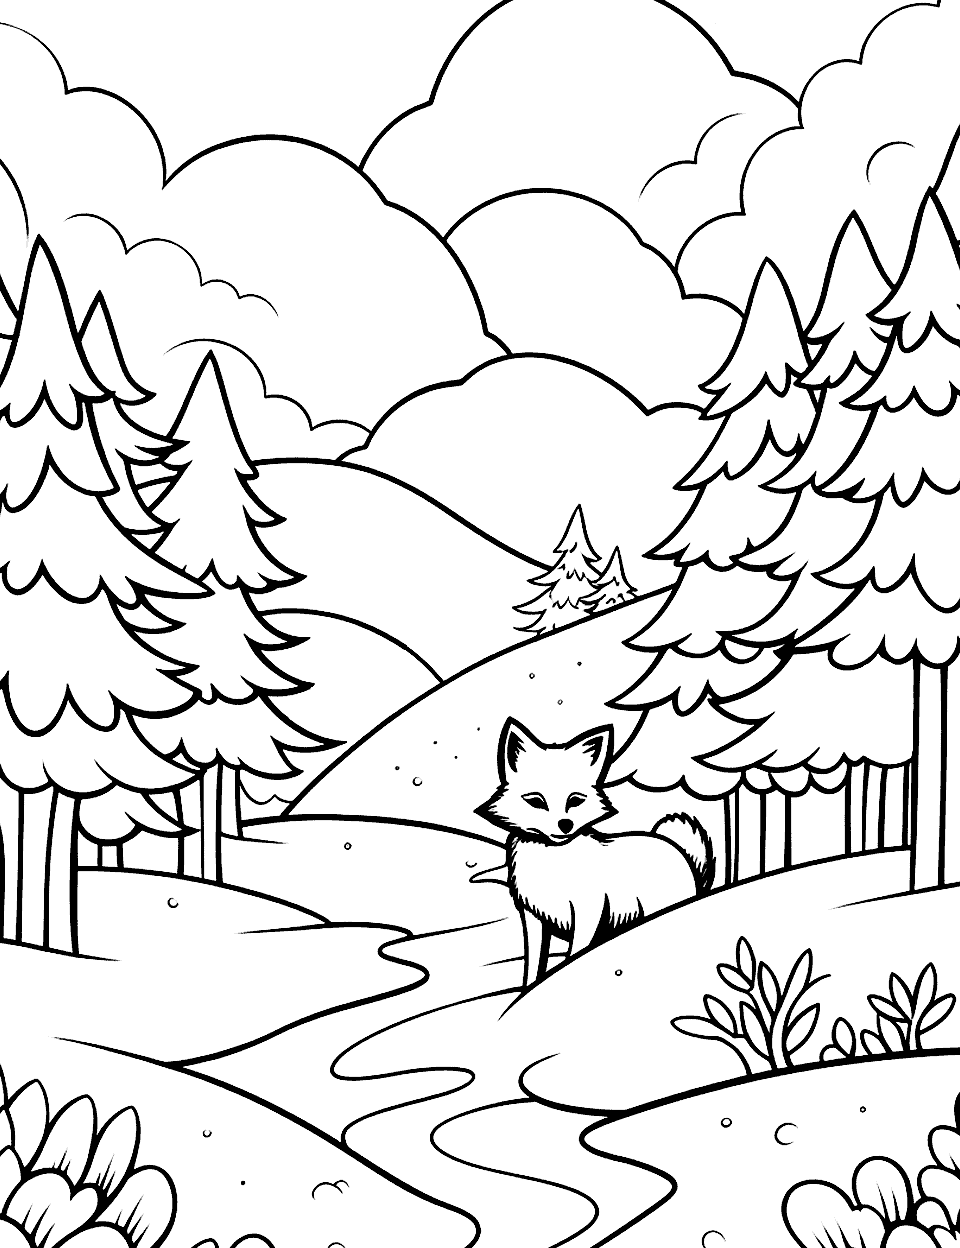 Fox in a Snowy Forest Nature Coloring Page - A fox walking through a snowy forest with snow-covered trees.